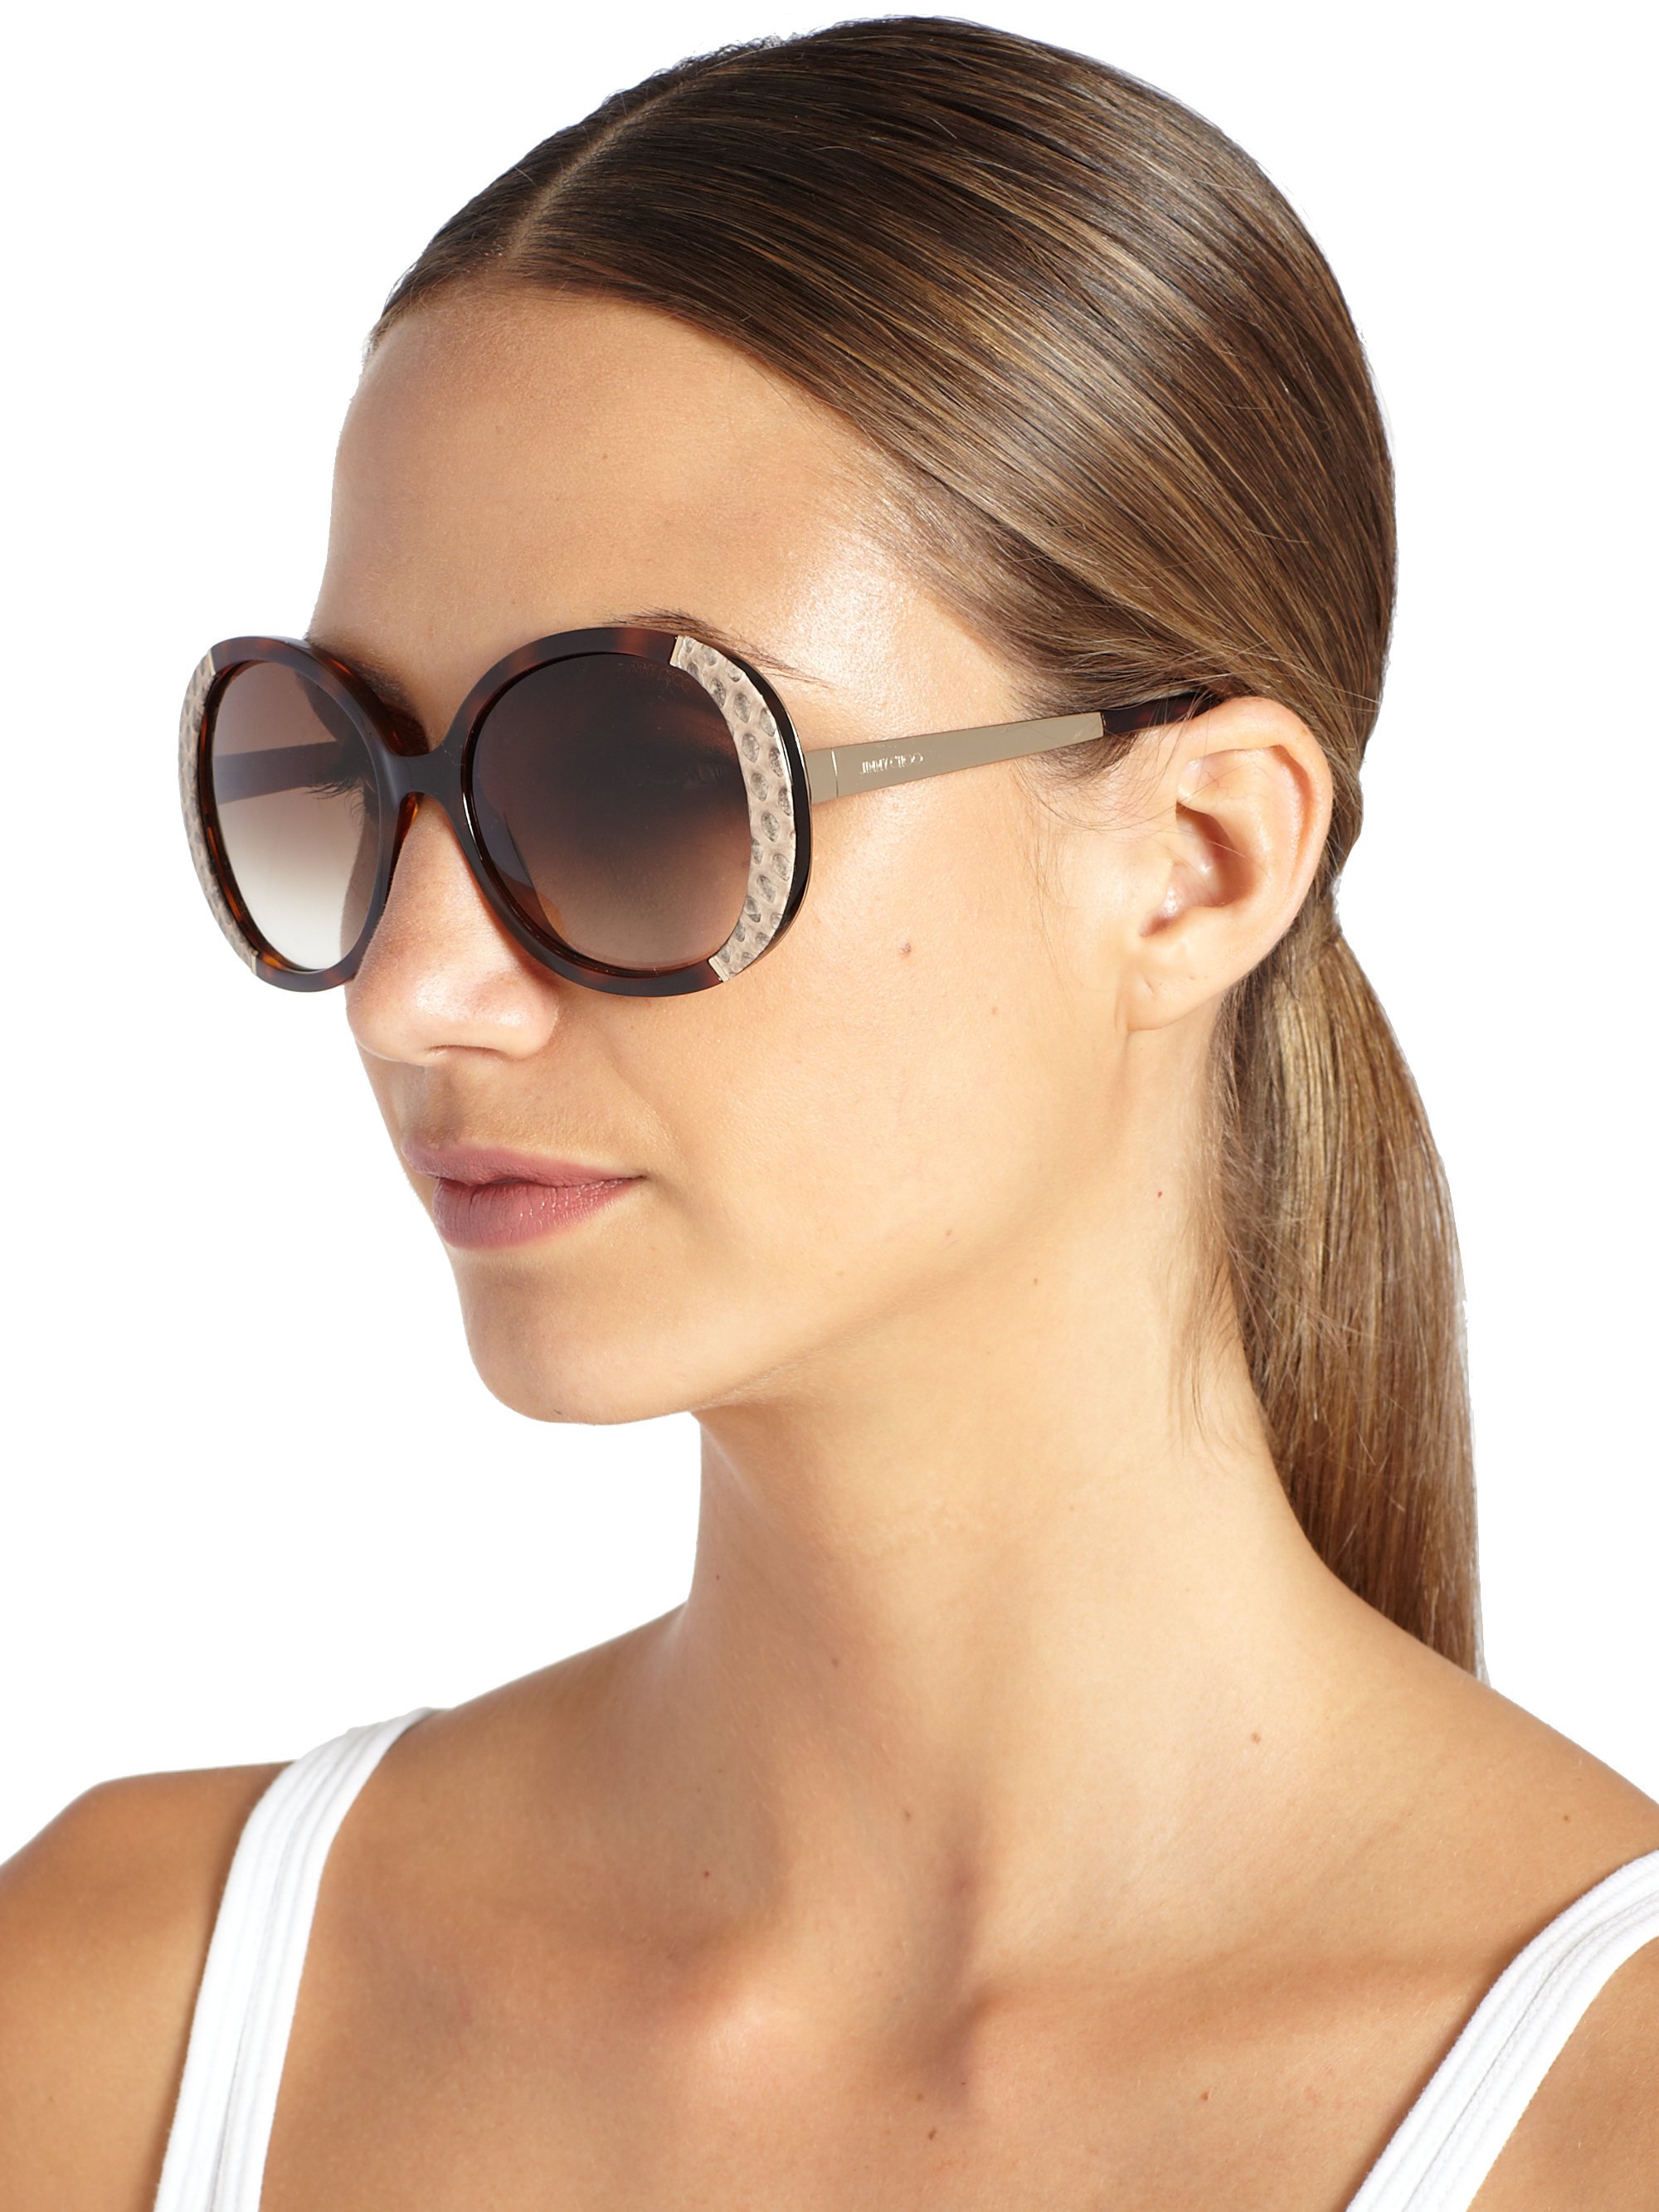 Lyst - Jimmy Choo Millie Snakeskin Leather-Trimmed Sunglasses in Brown